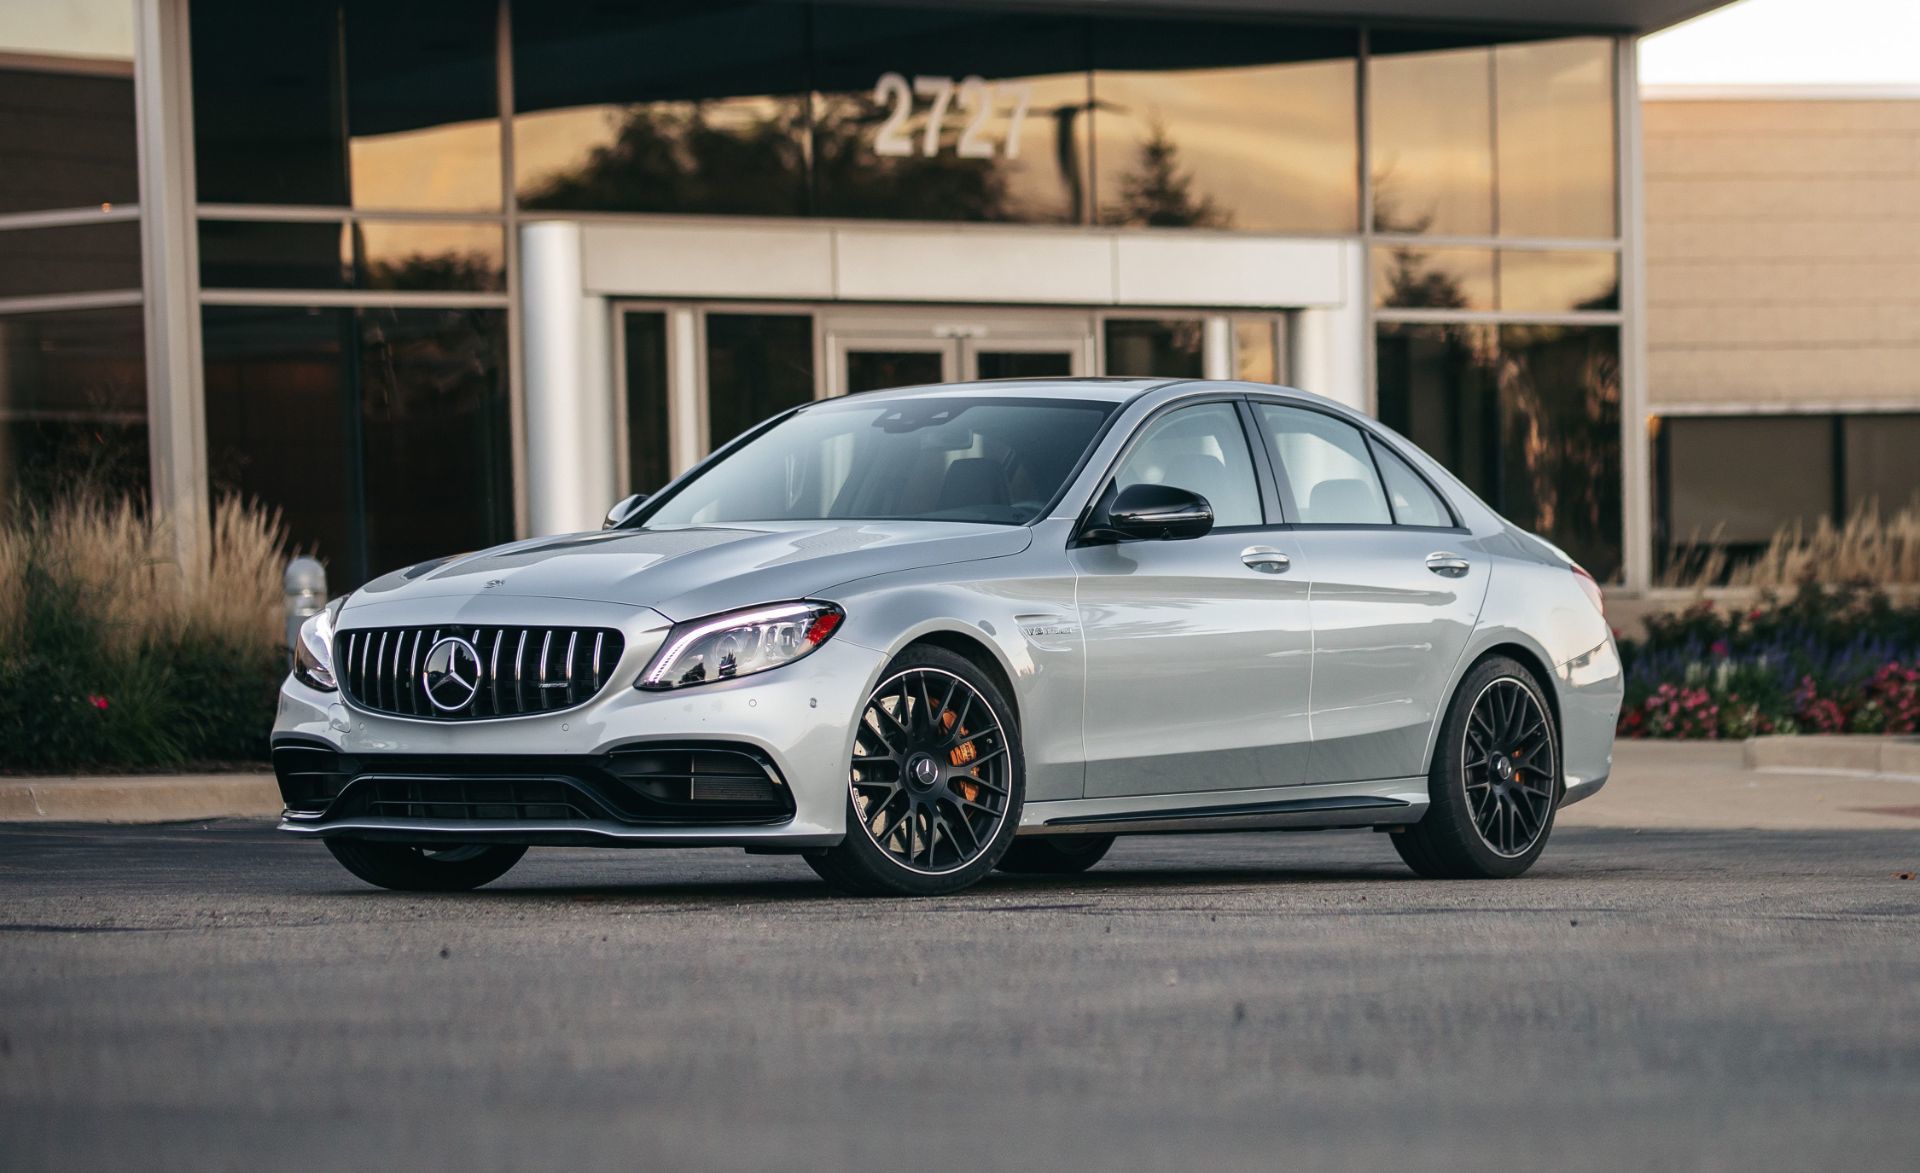 AMG C 63 Sedan: The Perfect Epitome of Power and Class